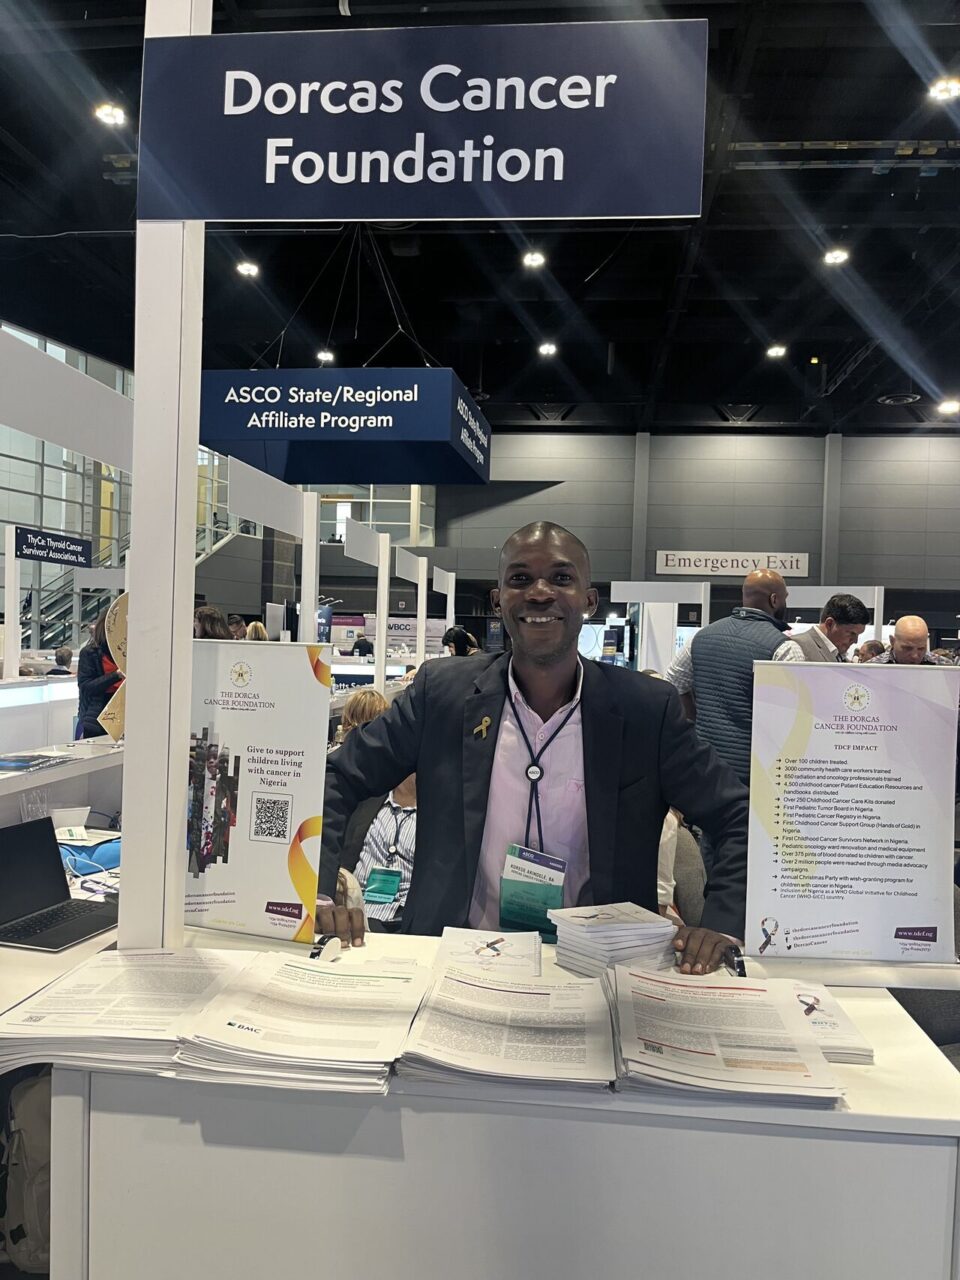 Korede Akindele: I highlighted at ASCO24 the impactful work of The Dorcas Cancer Foundation focusing on our efforts to improve childhood cancer care in Nigeria